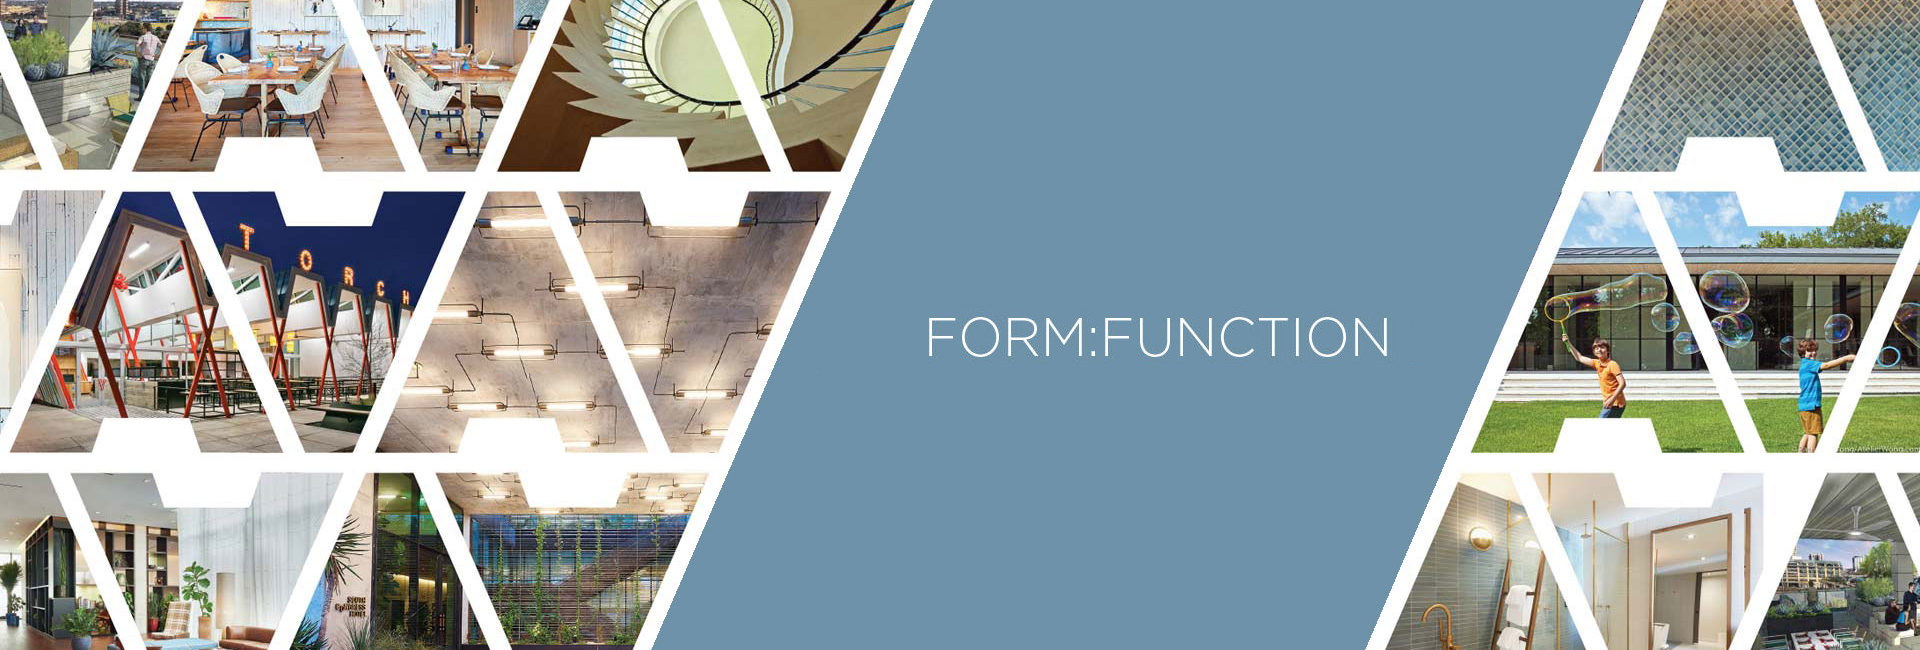 Austin Foundation for Architecture - Form:Function 2021